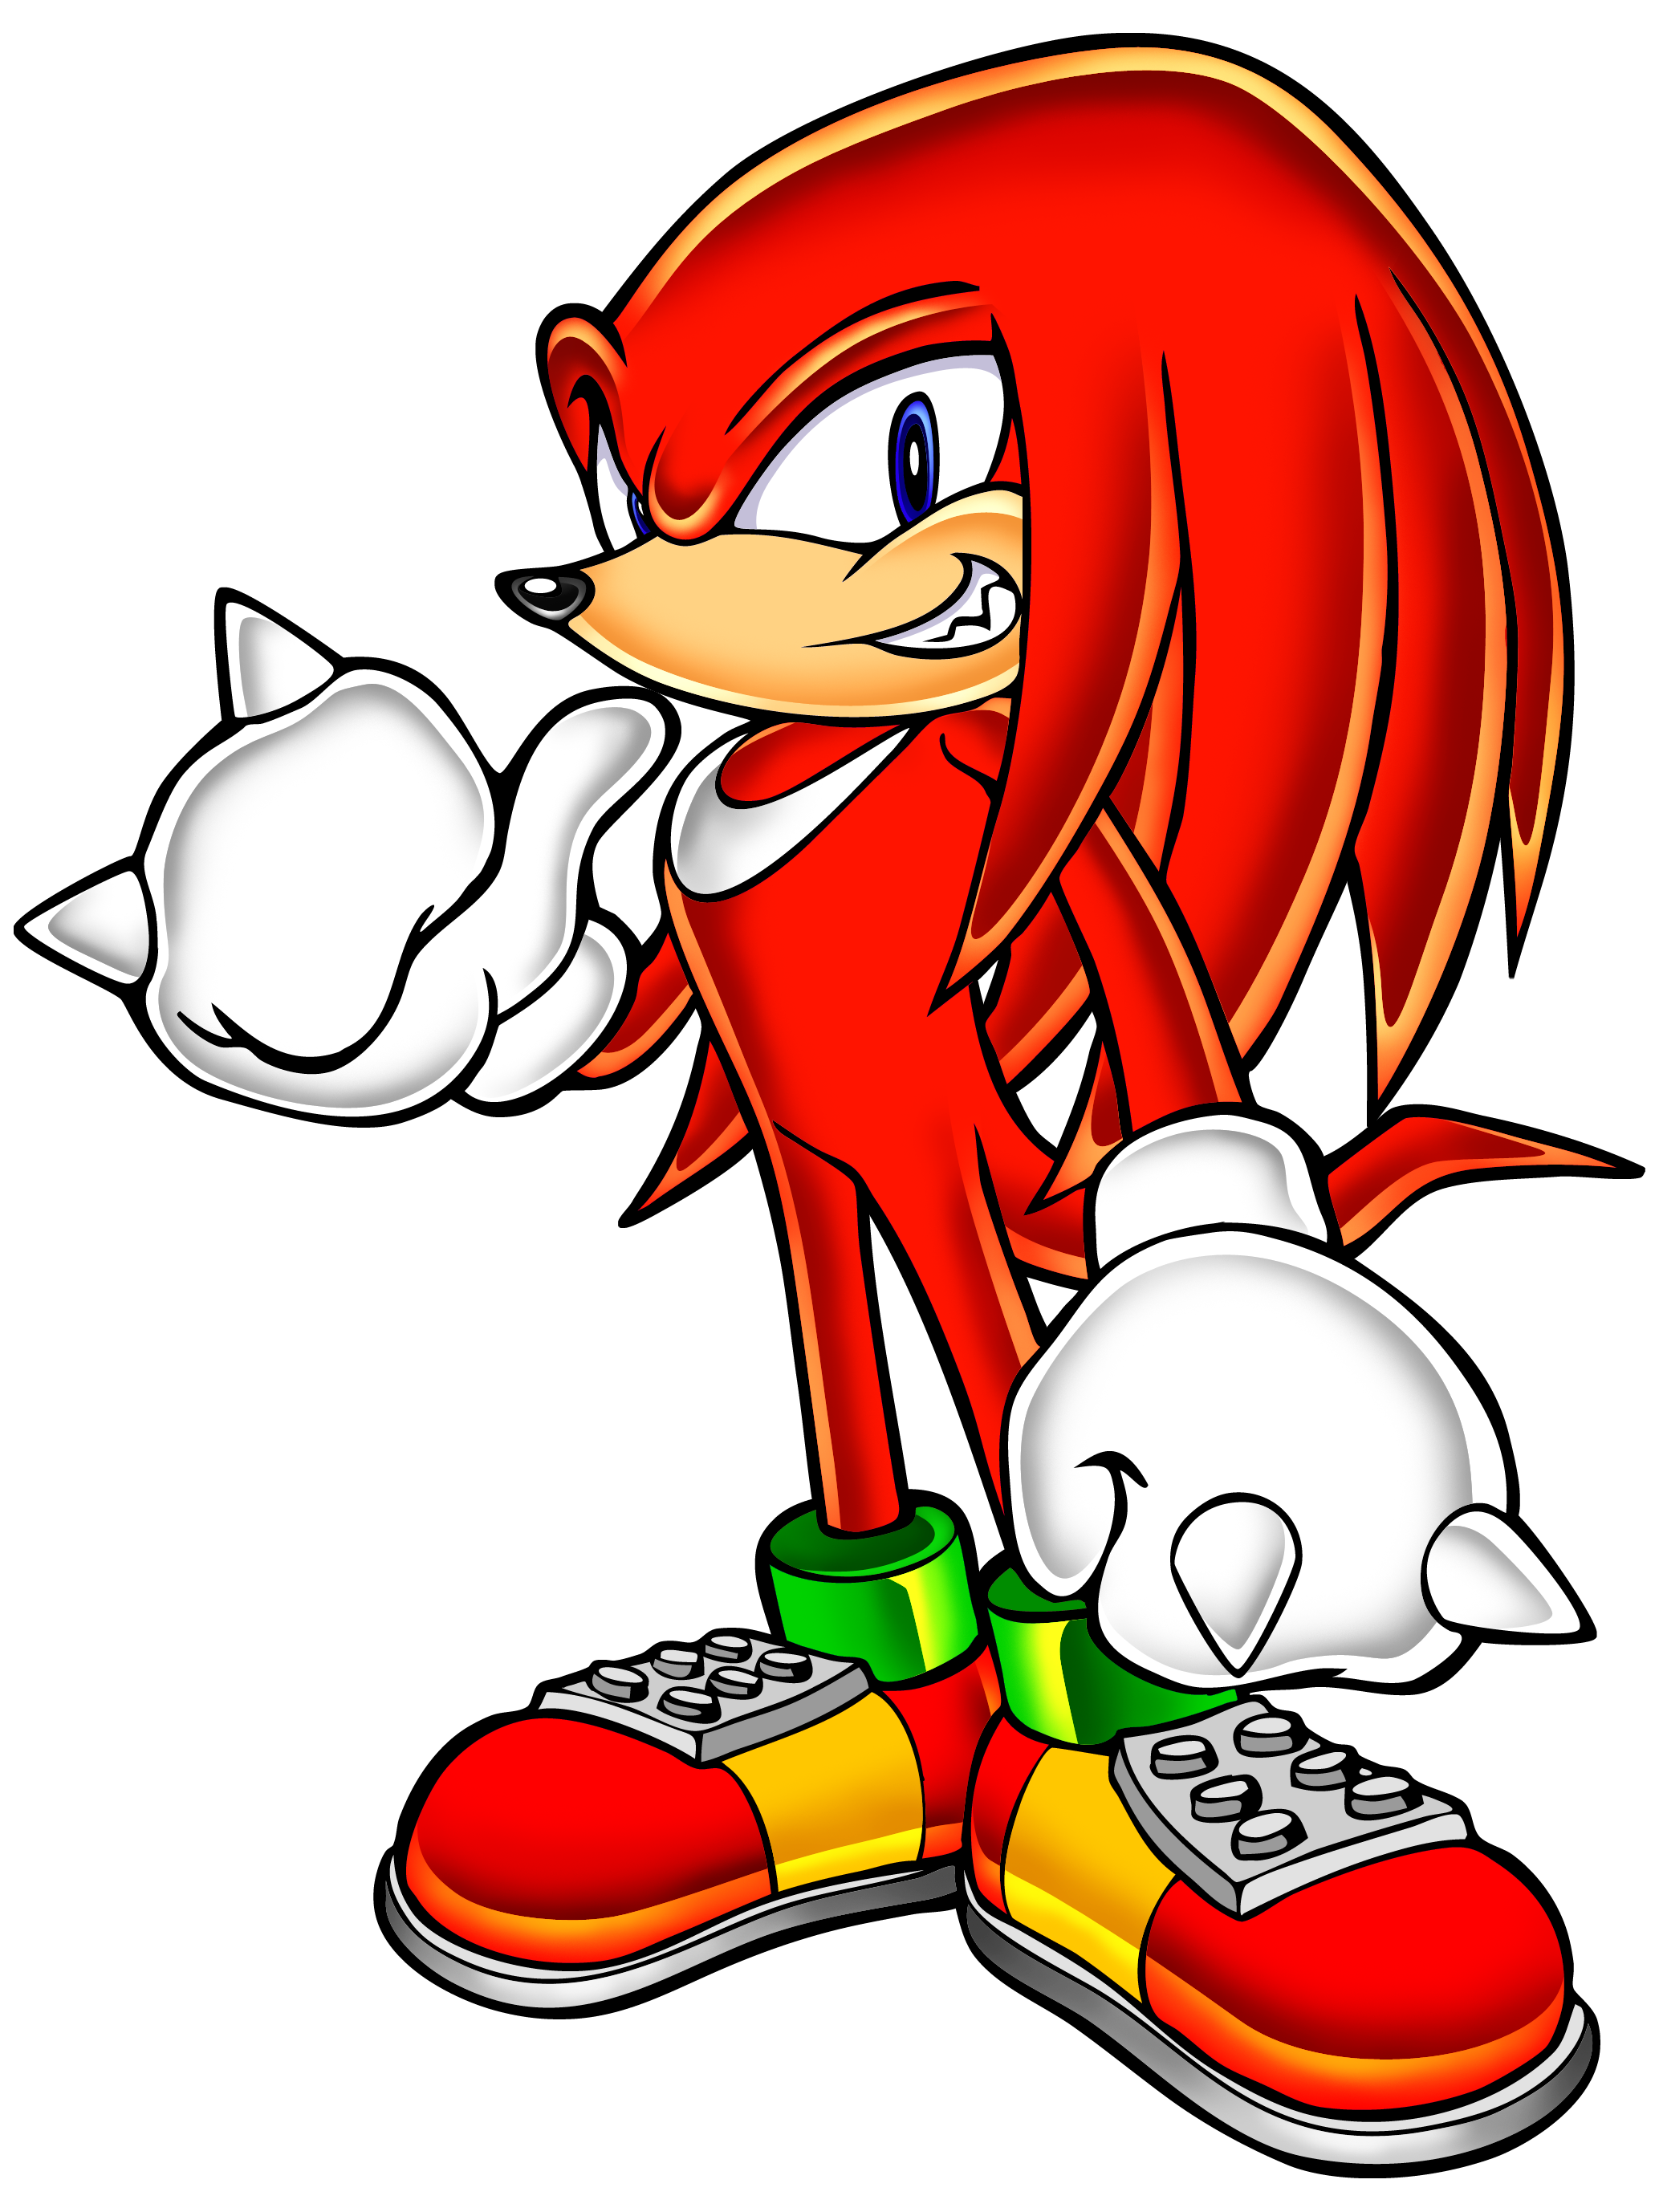 Knuckles the Echidna. 